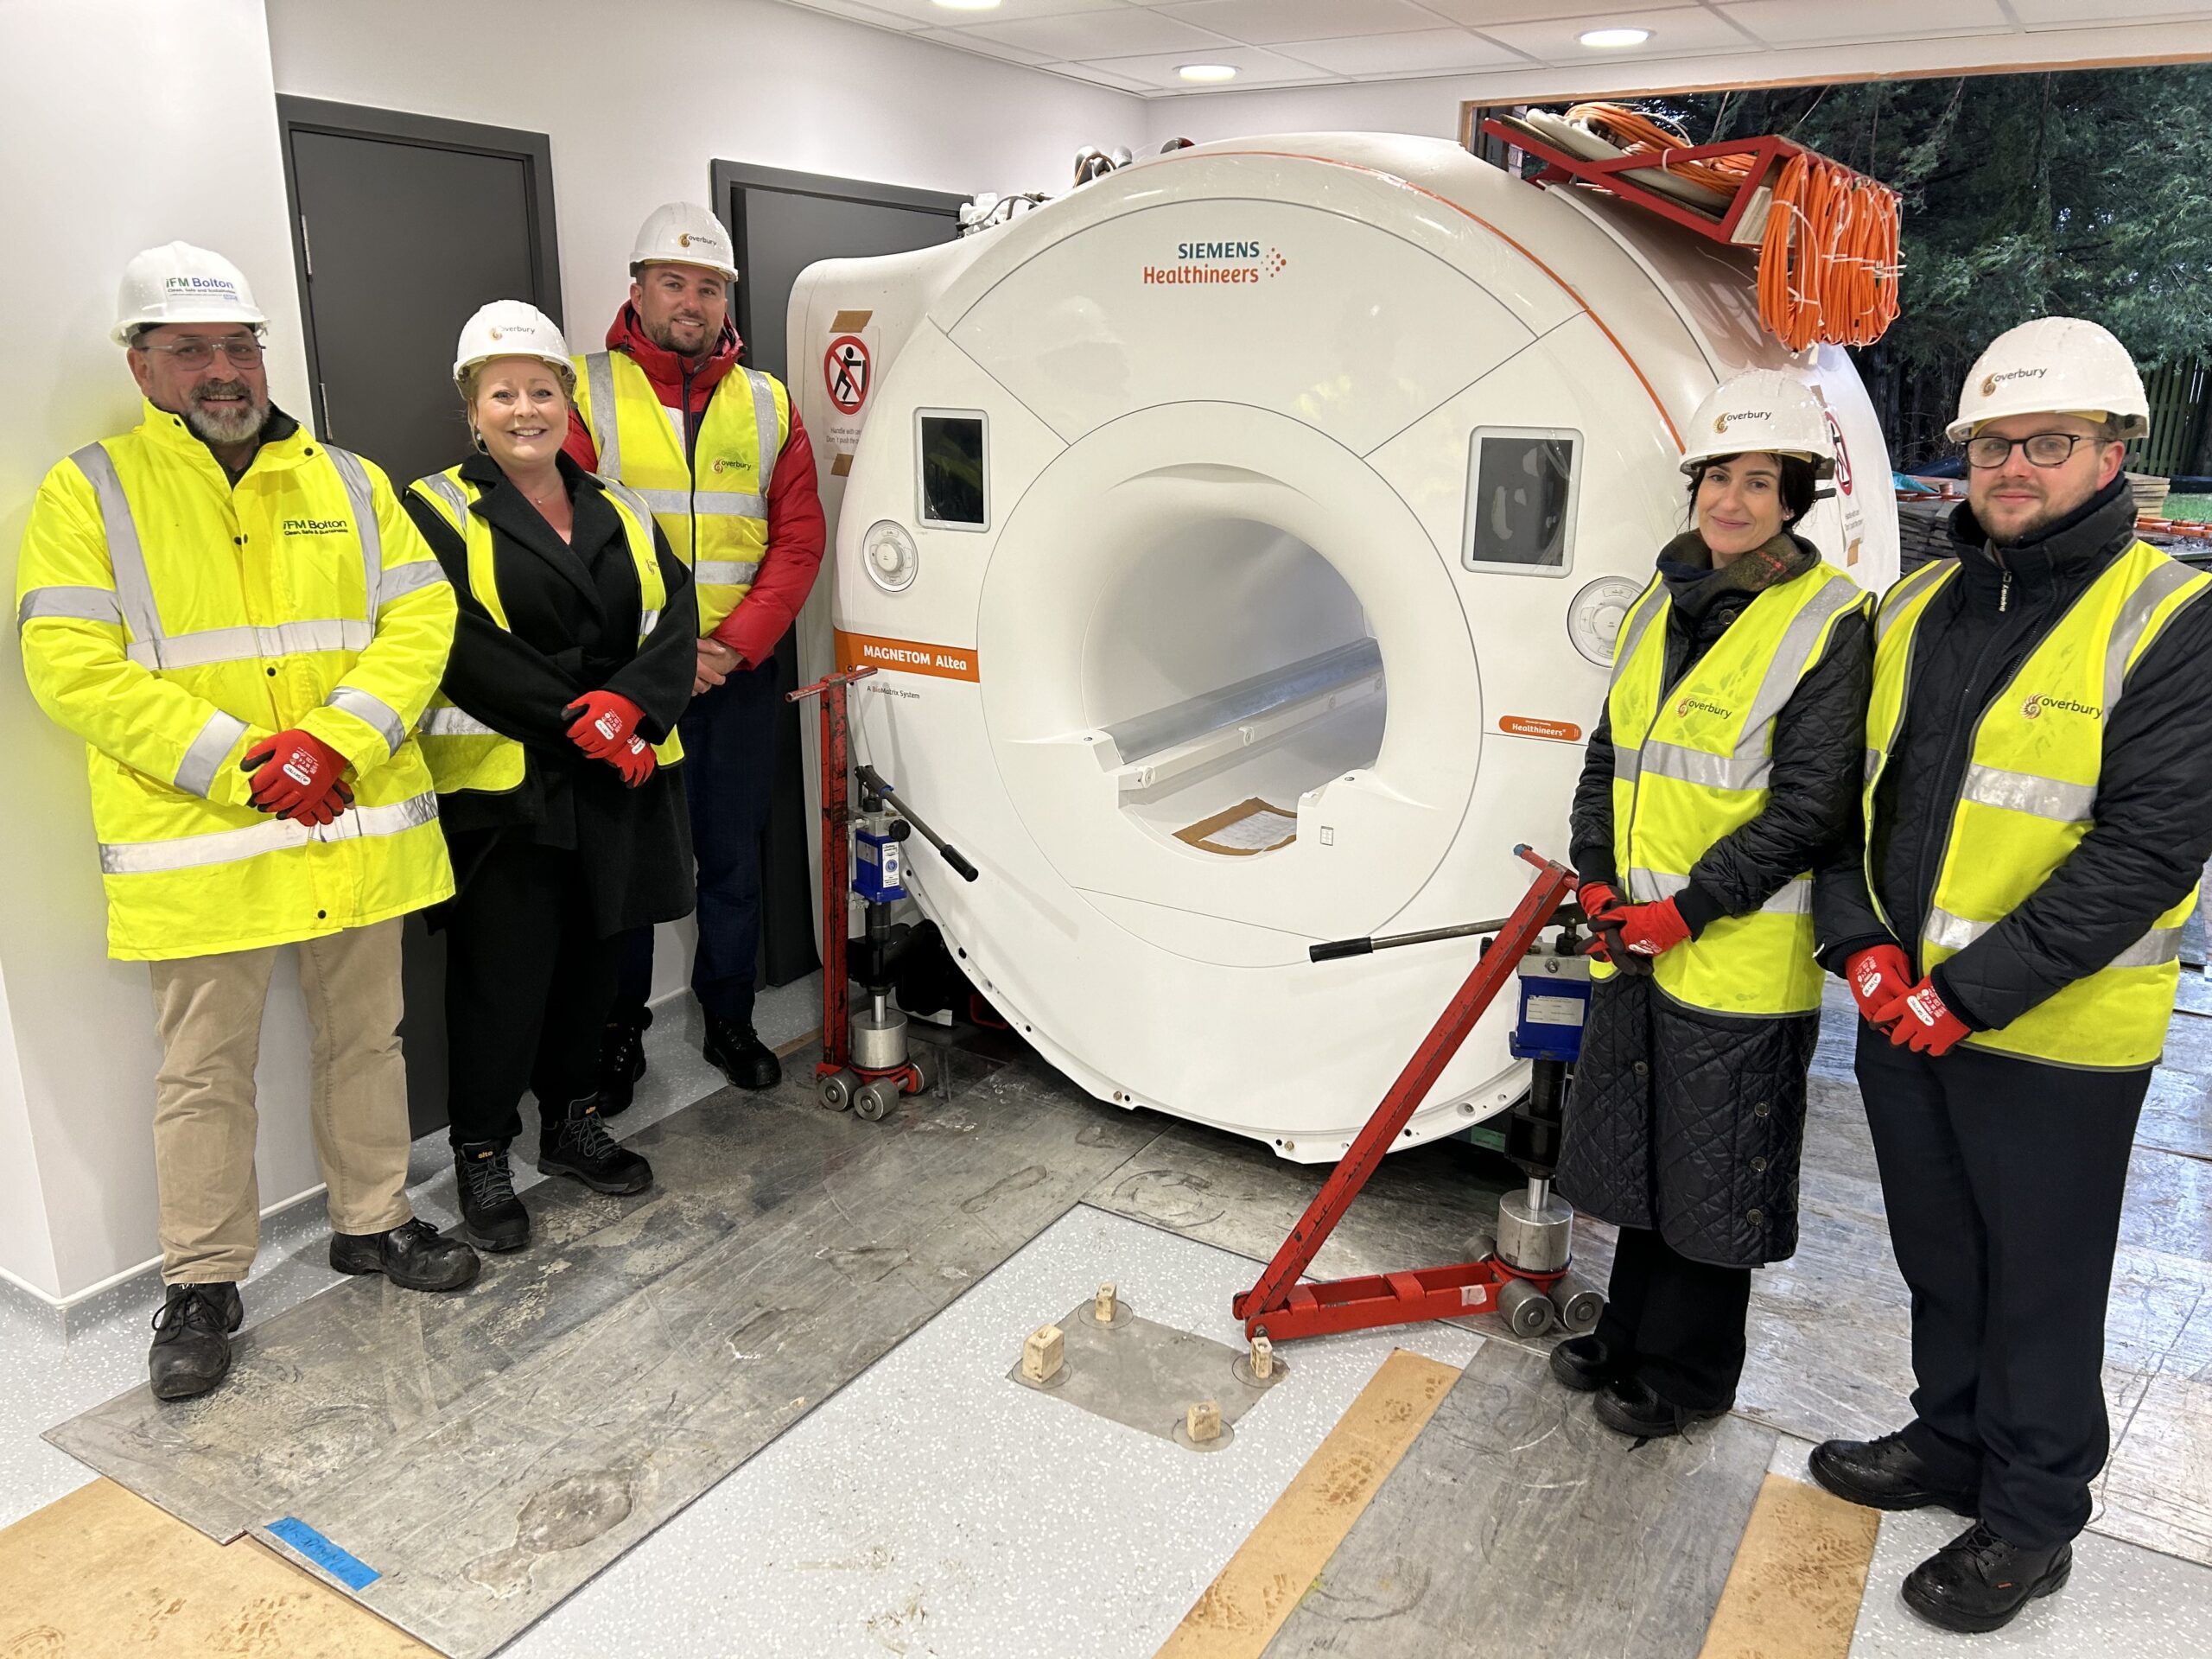 The installation of the MRI scanner at Bolton's CDC